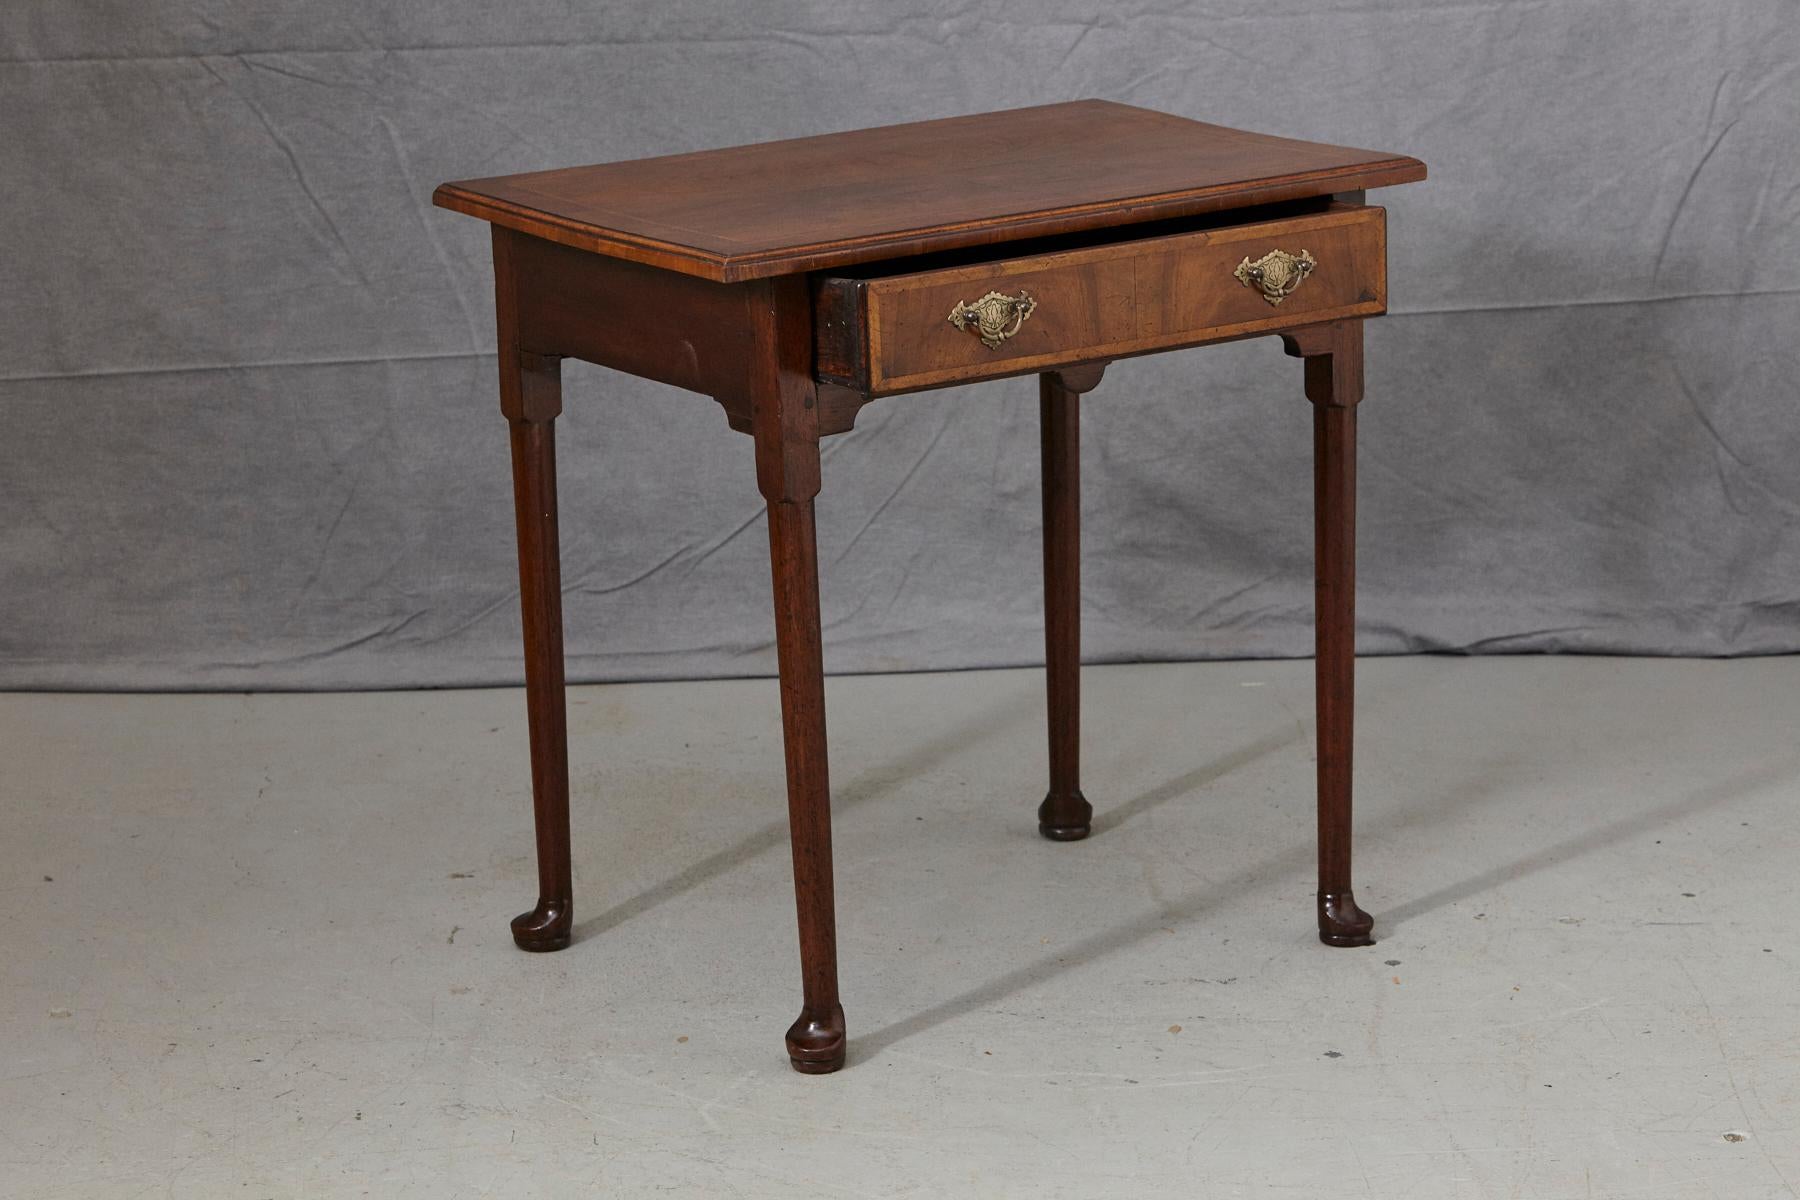 American Queen Anne Style Walnut Side Table with Wood Inlays and Brass Hardware